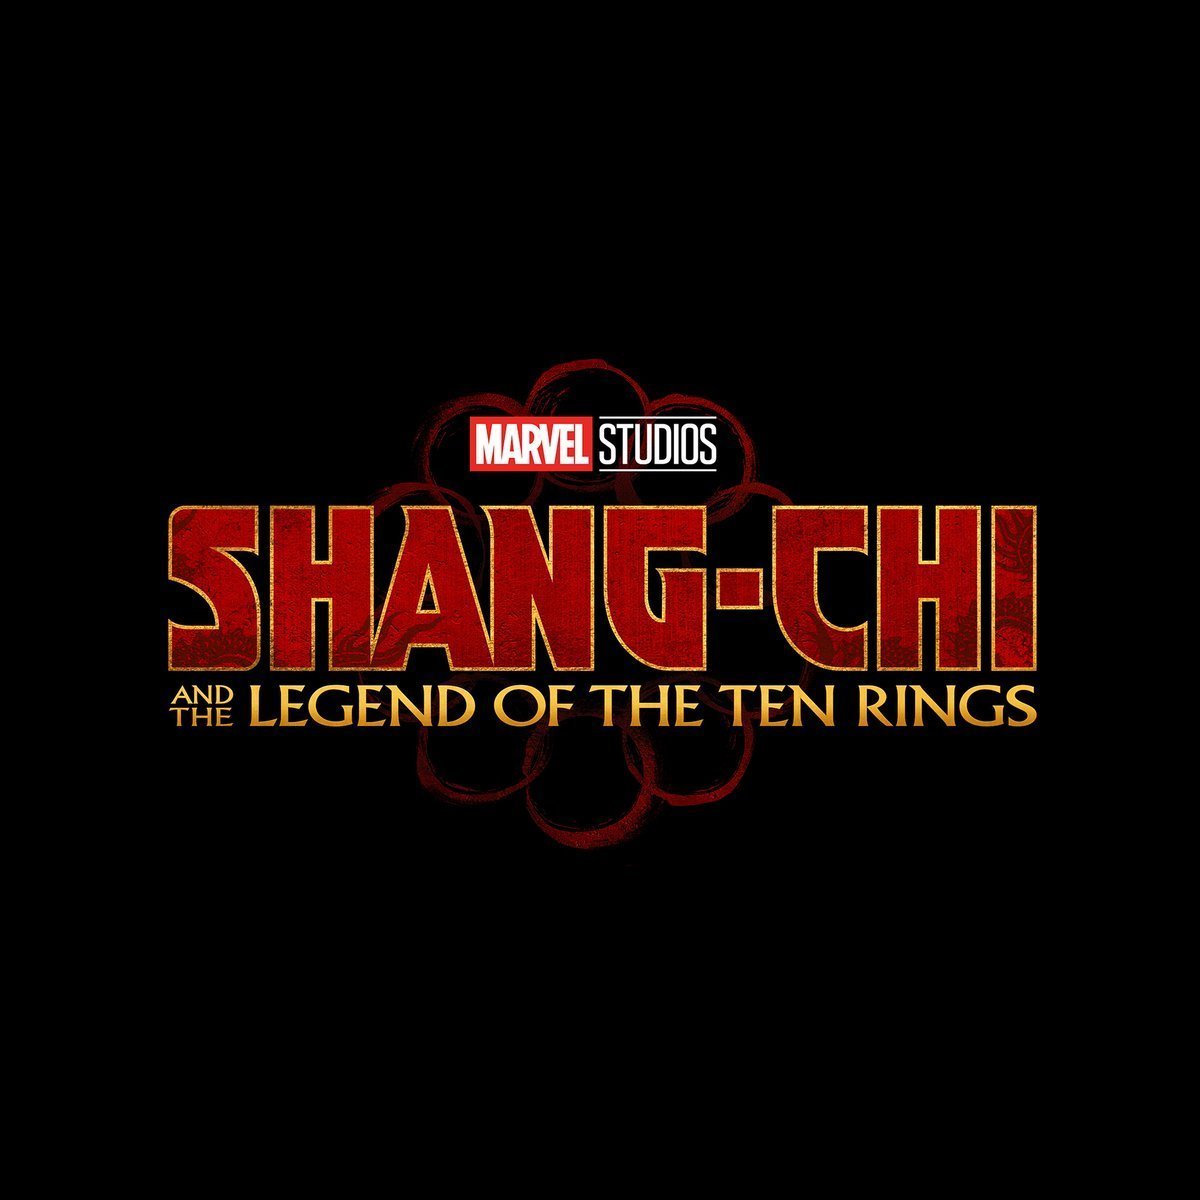 Le logo du Marvel Studios, Shang-Chi and the Legend of the Ten Rings